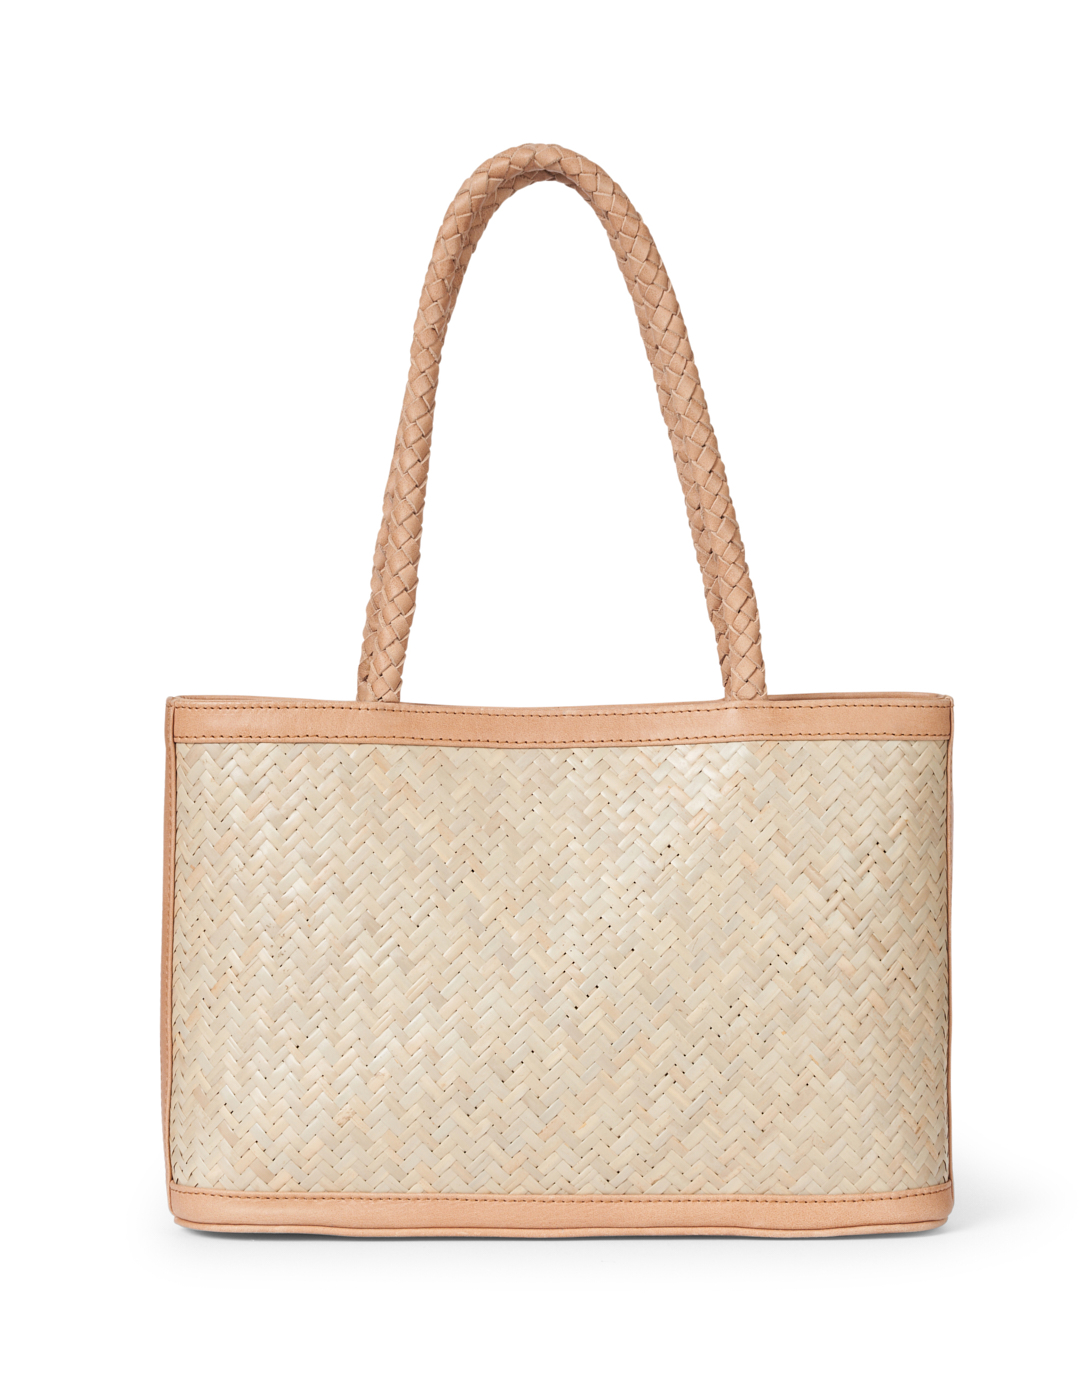 Rose Mini Round Crossbody Straw Bag with Natural Leather Closure and Handle